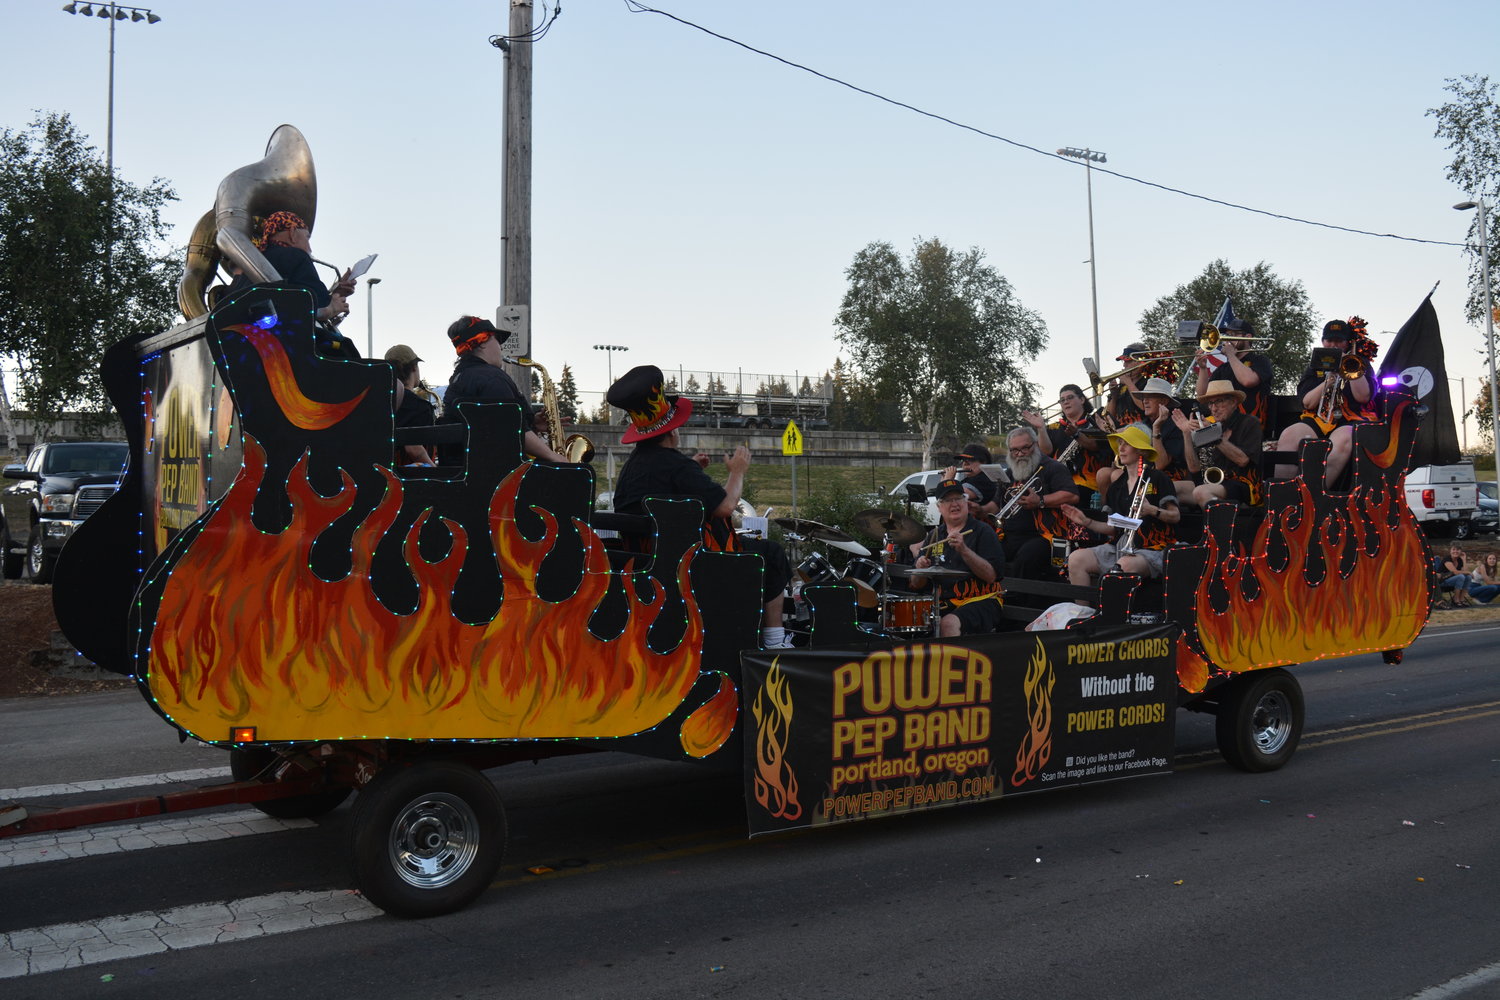 The Portland Power Pep Band’s float takes part in the La Center Our Days parade on July 29.